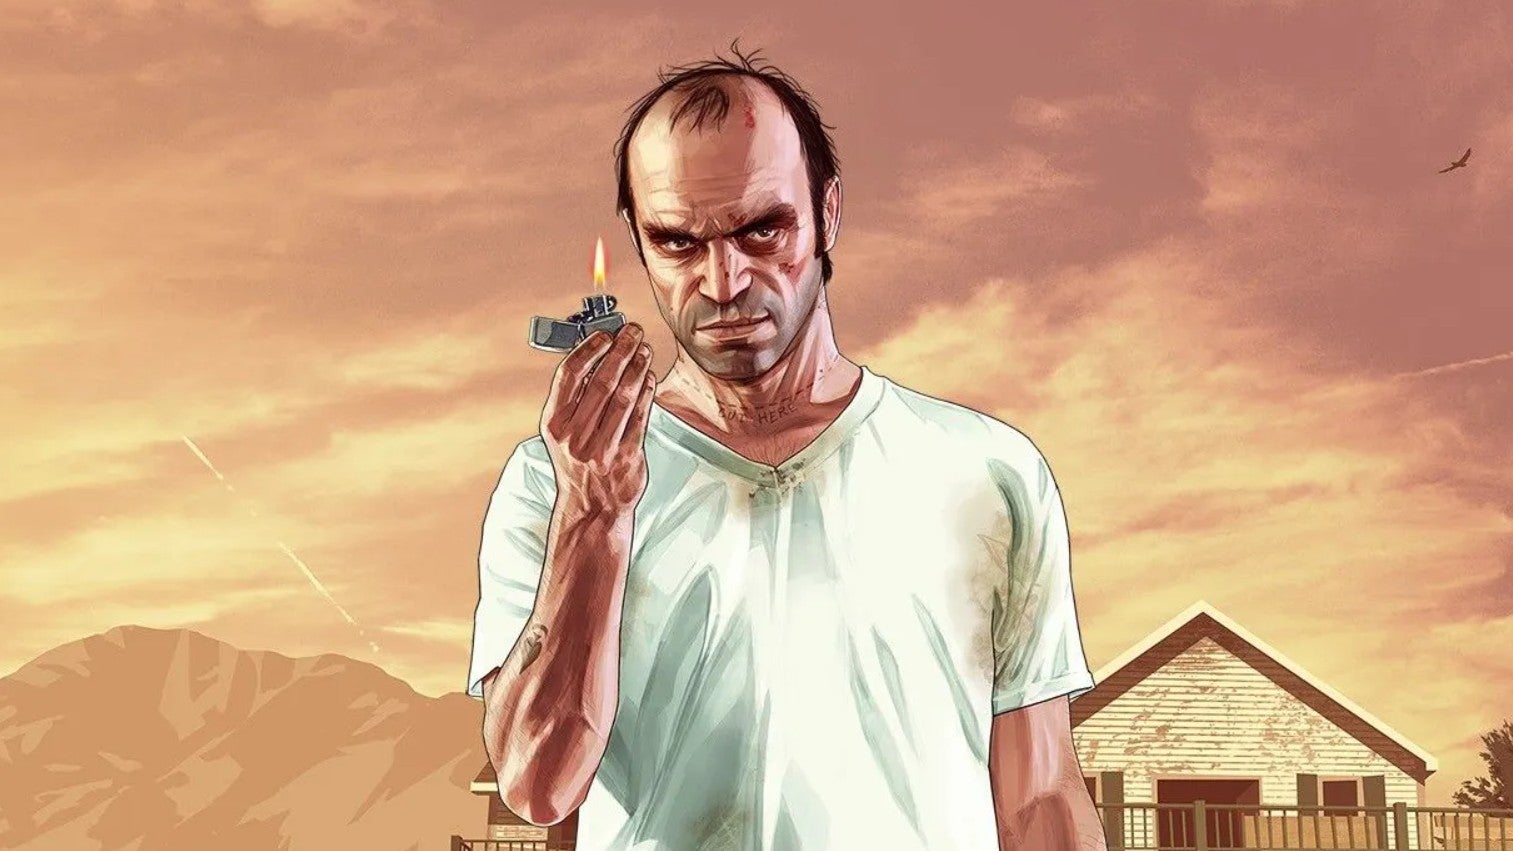 Image for Grand Theft Auto 5 momentum slows, Take-Two adjusts financial forecast